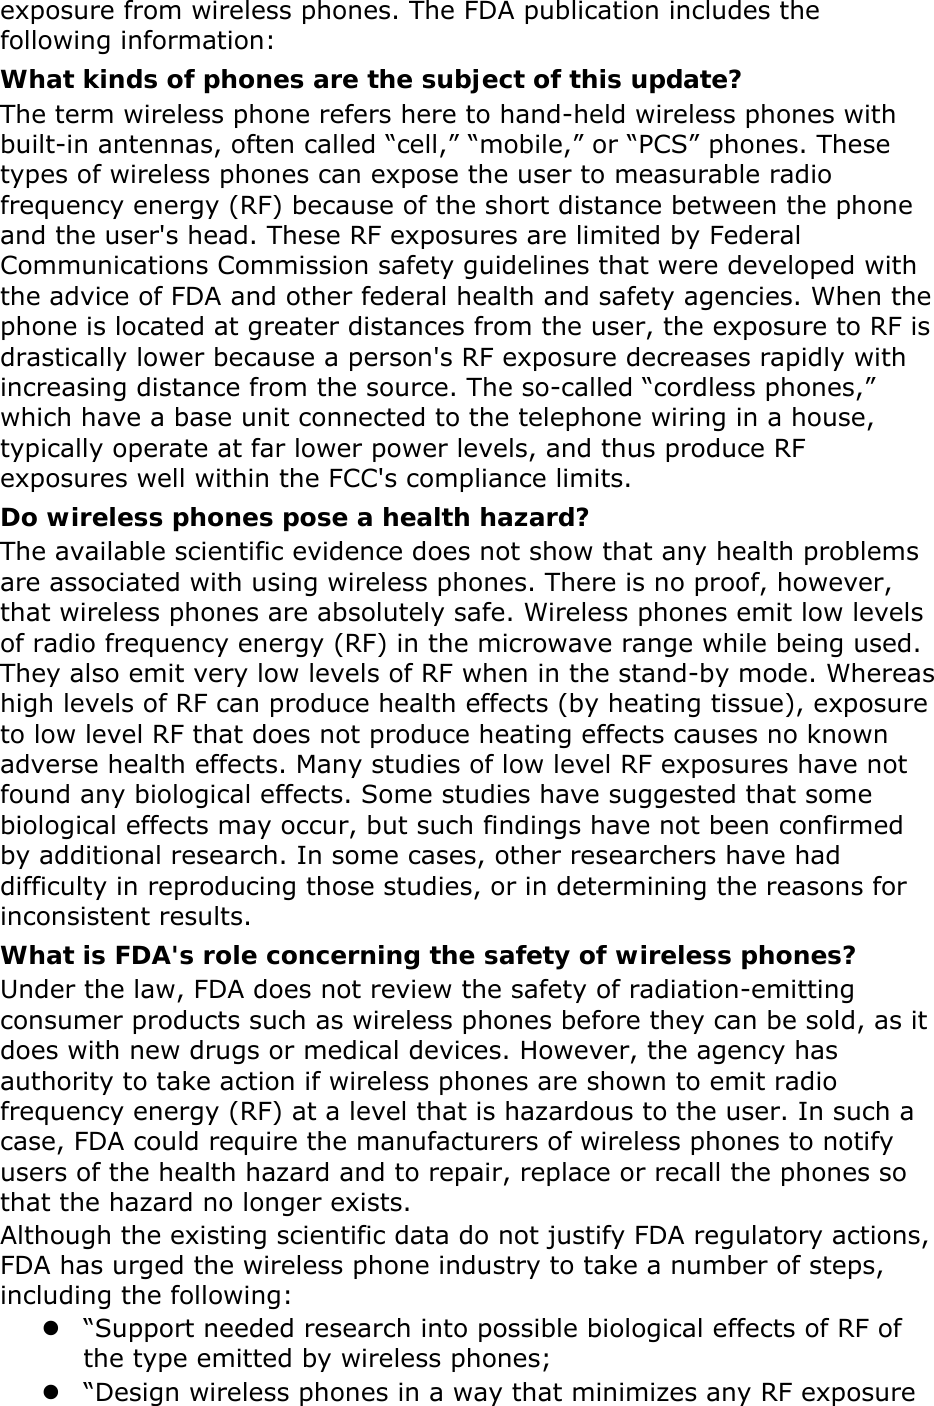 exposure from wireless phones. The FDA publication includes the following information: What kinds of phones are the subject of this update? The term wireless phone refers here to hand-held wireless phones with built-in antennas, often called “cell,” “mobile,” or “PCS” phones. These types of wireless phones can expose the user to measurable radio frequency energy (RF) because of the short distance between the phone and the user&apos;s head. These RF exposures are limited by Federal Communications Commission safety guidelines that were developed with the advice of FDA and other federal health and safety agencies. When the phone is located at greater distances from the user, the exposure to RF is drastically lower because a person&apos;s RF exposure decreases rapidly with increasing distance from the source. The so-called “cordless phones,” which have a base unit connected to the telephone wiring in a house, typically operate at far lower power levels, and thus produce RF exposures well within the FCC&apos;s compliance limits. Do wireless phones pose a health hazard? The available scientific evidence does not show that any health problems are associated with using wireless phones. There is no proof, however, that wireless phones are absolutely safe. Wireless phones emit low levels of radio frequency energy (RF) in the microwave range while being used. They also emit very low levels of RF when in the stand-by mode. Whereas high levels of RF can produce health effects (by heating tissue), exposure to low level RF that does not produce heating effects causes no known adverse health effects. Many studies of low level RF exposures have not found any biological effects. Some studies have suggested that some biological effects may occur, but such findings have not been confirmed by additional research. In some cases, other researchers have had difficulty in reproducing those studies, or in determining the reasons for inconsistent results. What is FDA&apos;s role concerning the safety of wireless phones? Under the law, FDA does not review the safety of radiation-emitting consumer products such as wireless phones before they can be sold, as it does with new drugs or medical devices. However, the agency has authority to take action if wireless phones are shown to emit radio frequency energy (RF) at a level that is hazardous to the user. In such a case, FDA could require the manufacturers of wireless phones to notify users of the health hazard and to repair, replace or recall the phones so that the hazard no longer exists. Although the existing scientific data do not justify FDA regulatory actions, FDA has urged the wireless phone industry to take a number of steps, including the following:  “Support needed research into possible biological effects of RF of the type emitted by wireless phones;  “Design wireless phones in a way that minimizes any RF exposure 